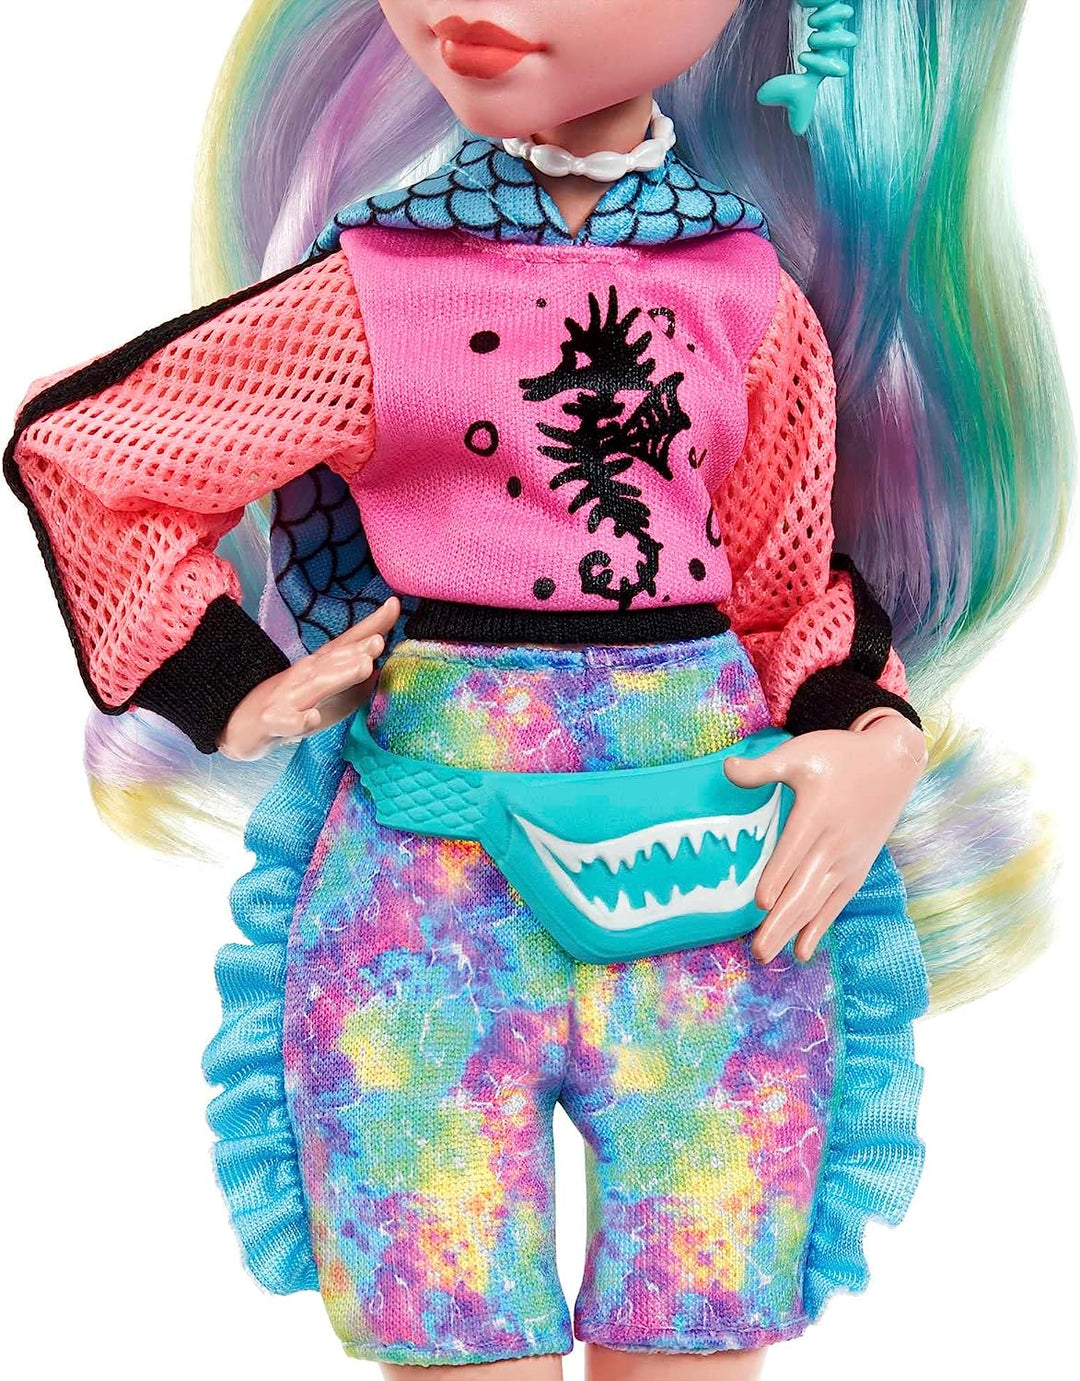 Monster High Doll, Lagoona Blue with Accessories and Pet Piranha, Posable Fashion Doll with Colorful Streaked Hair